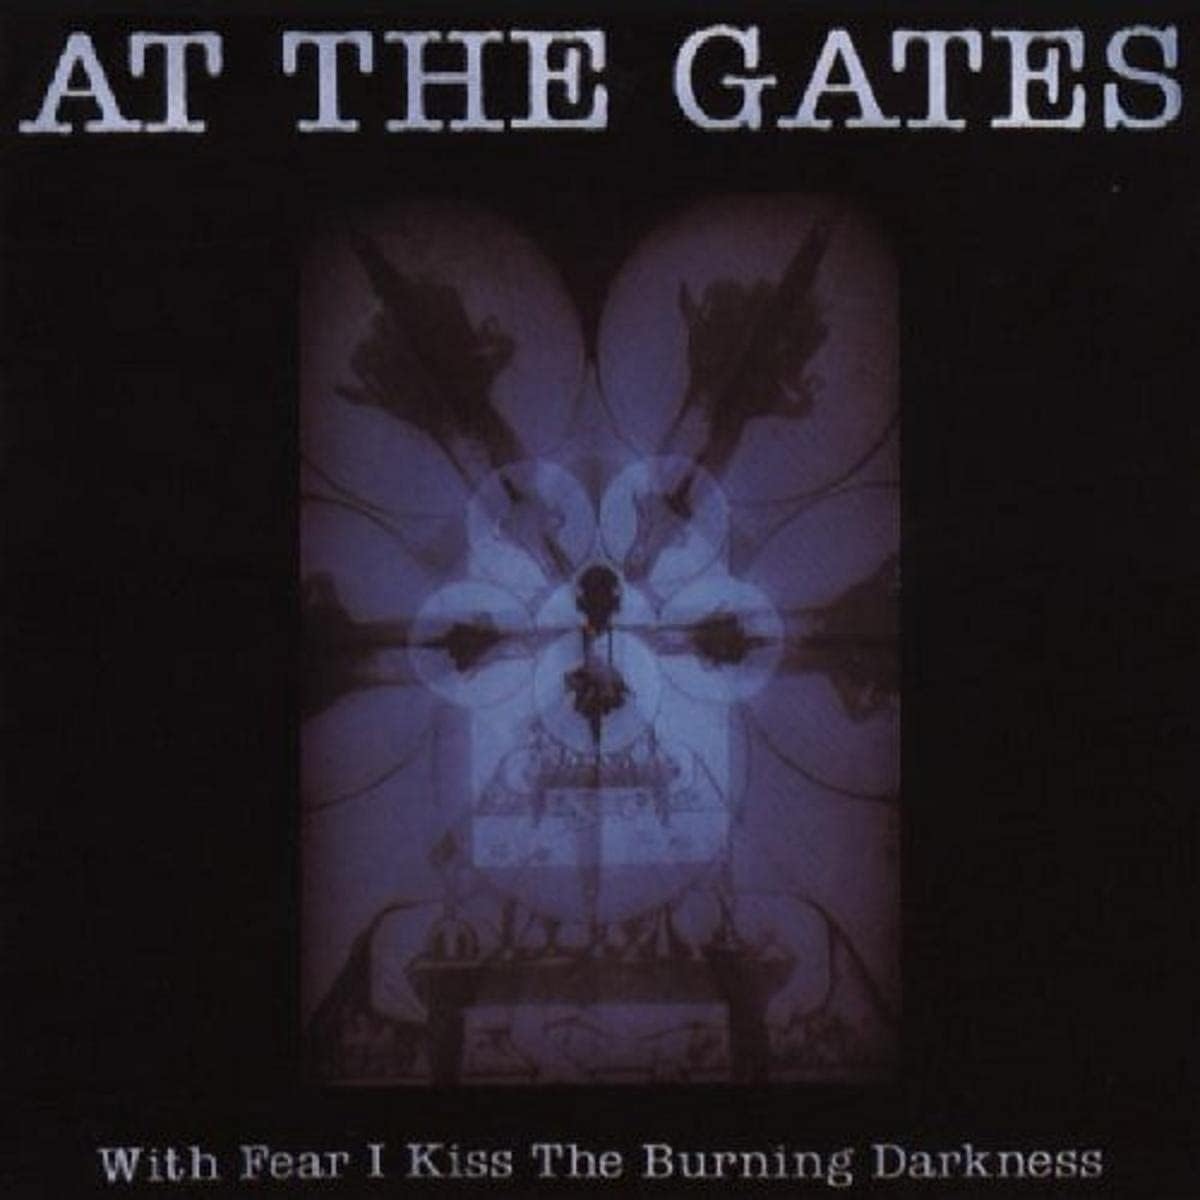 With Fear I Kiss The Burning Darkness | At The Gates